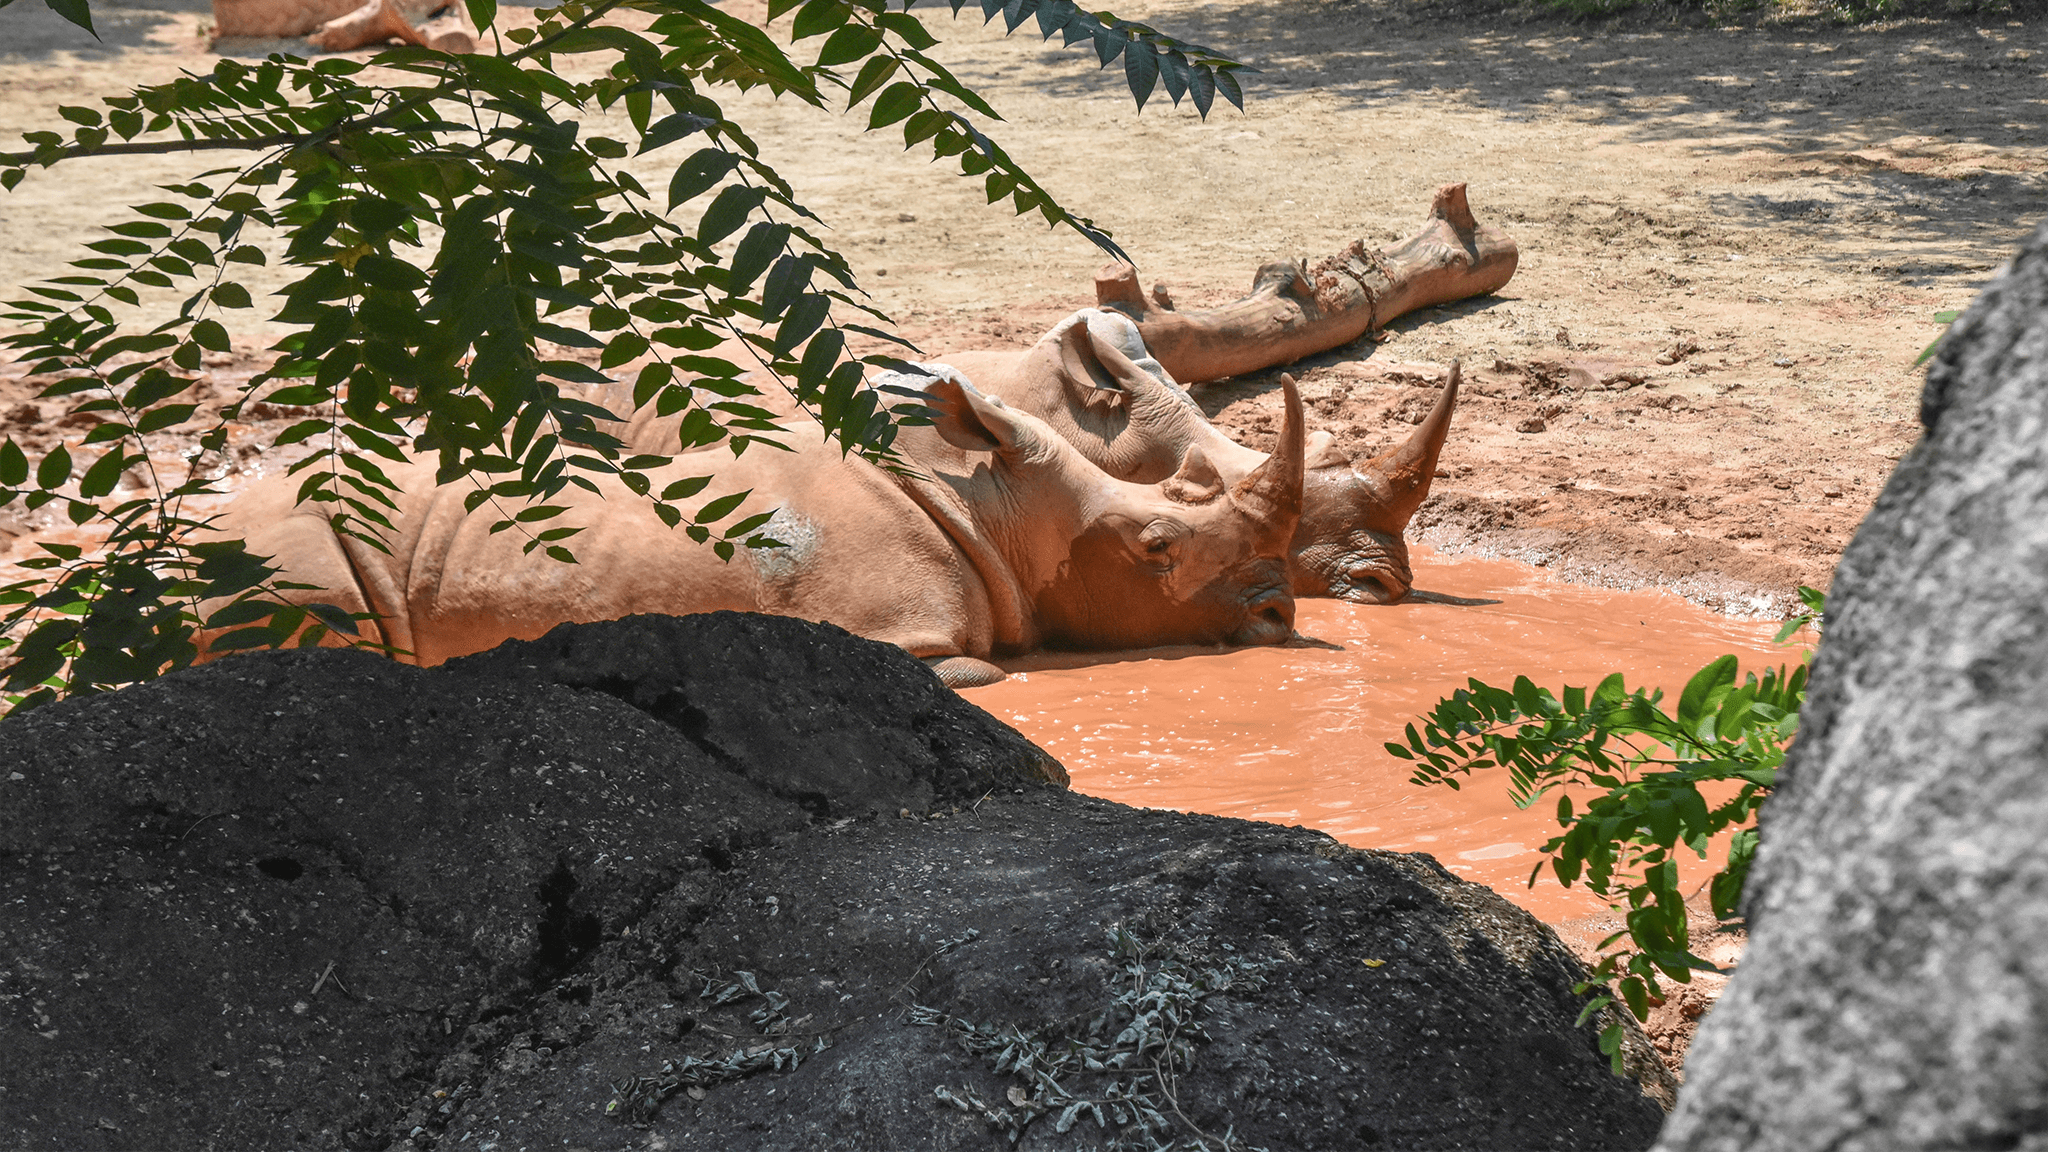 two rhinos lounge in a puddle of mud